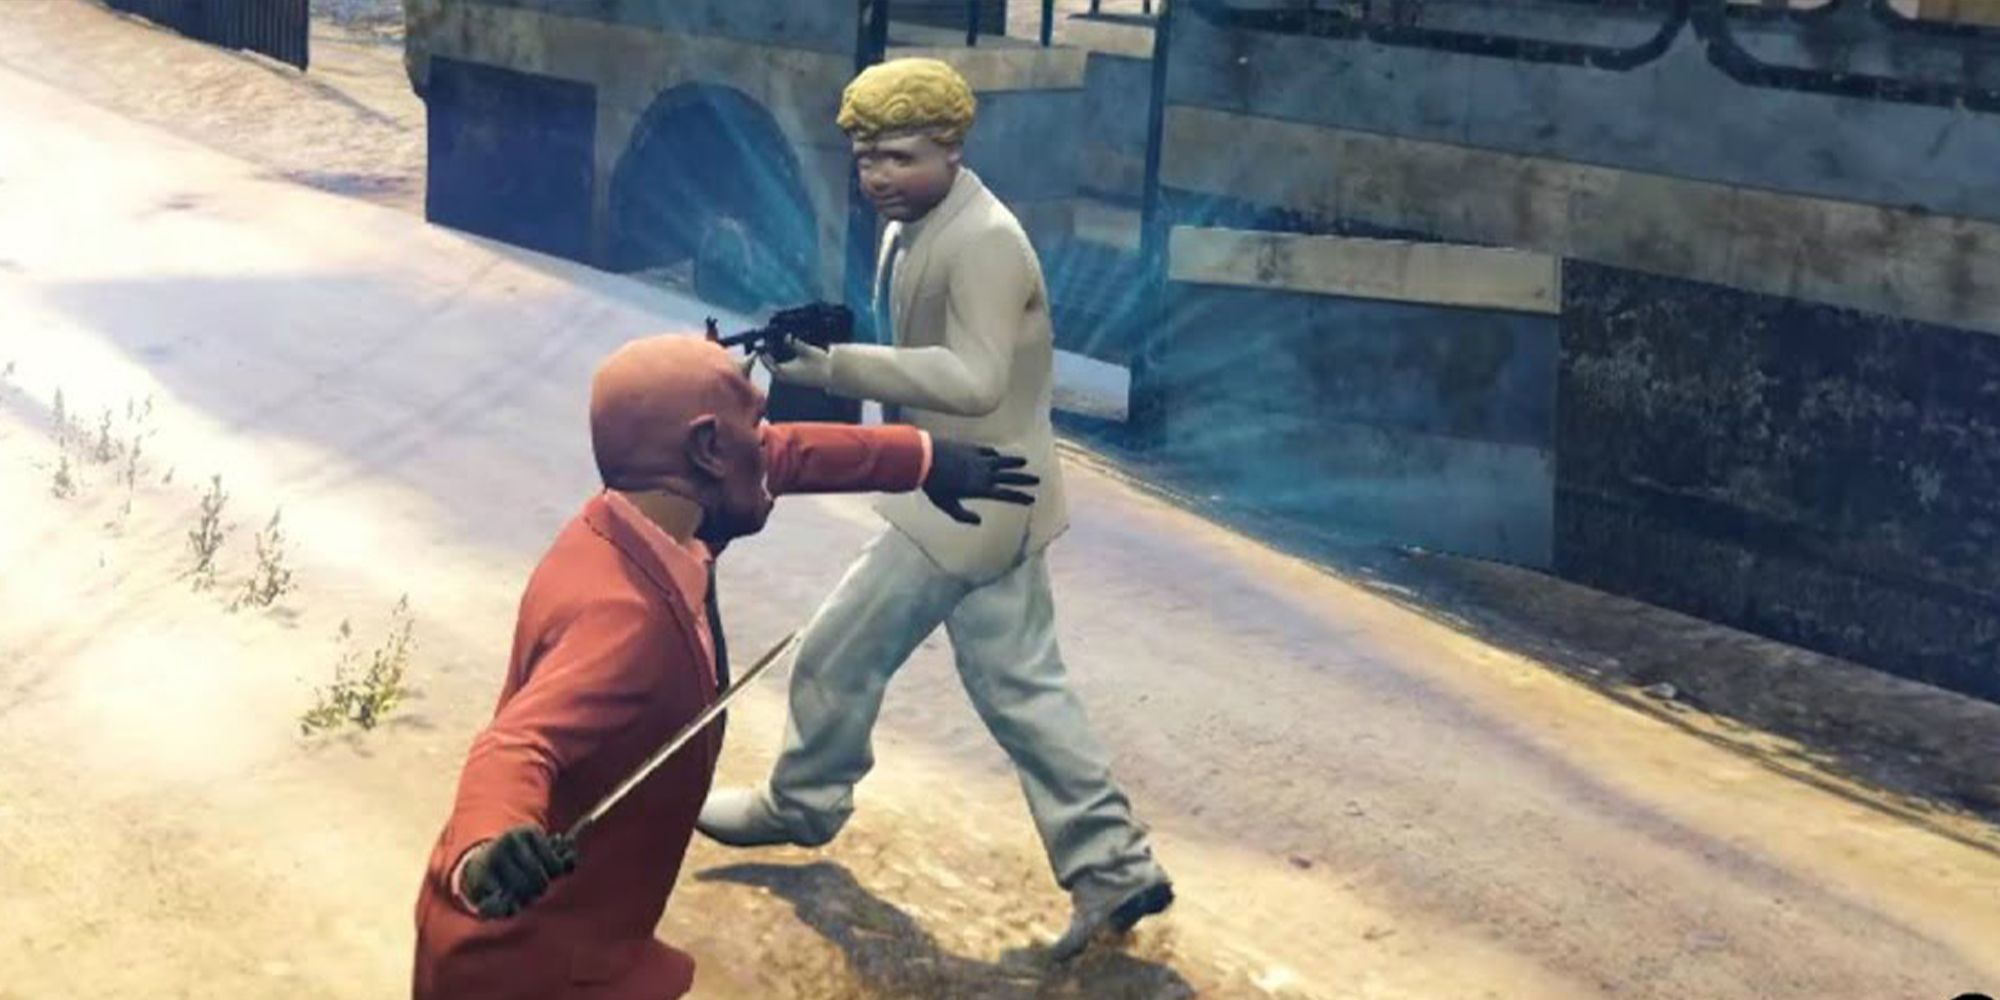 Two online players wearing masks in a gunfight